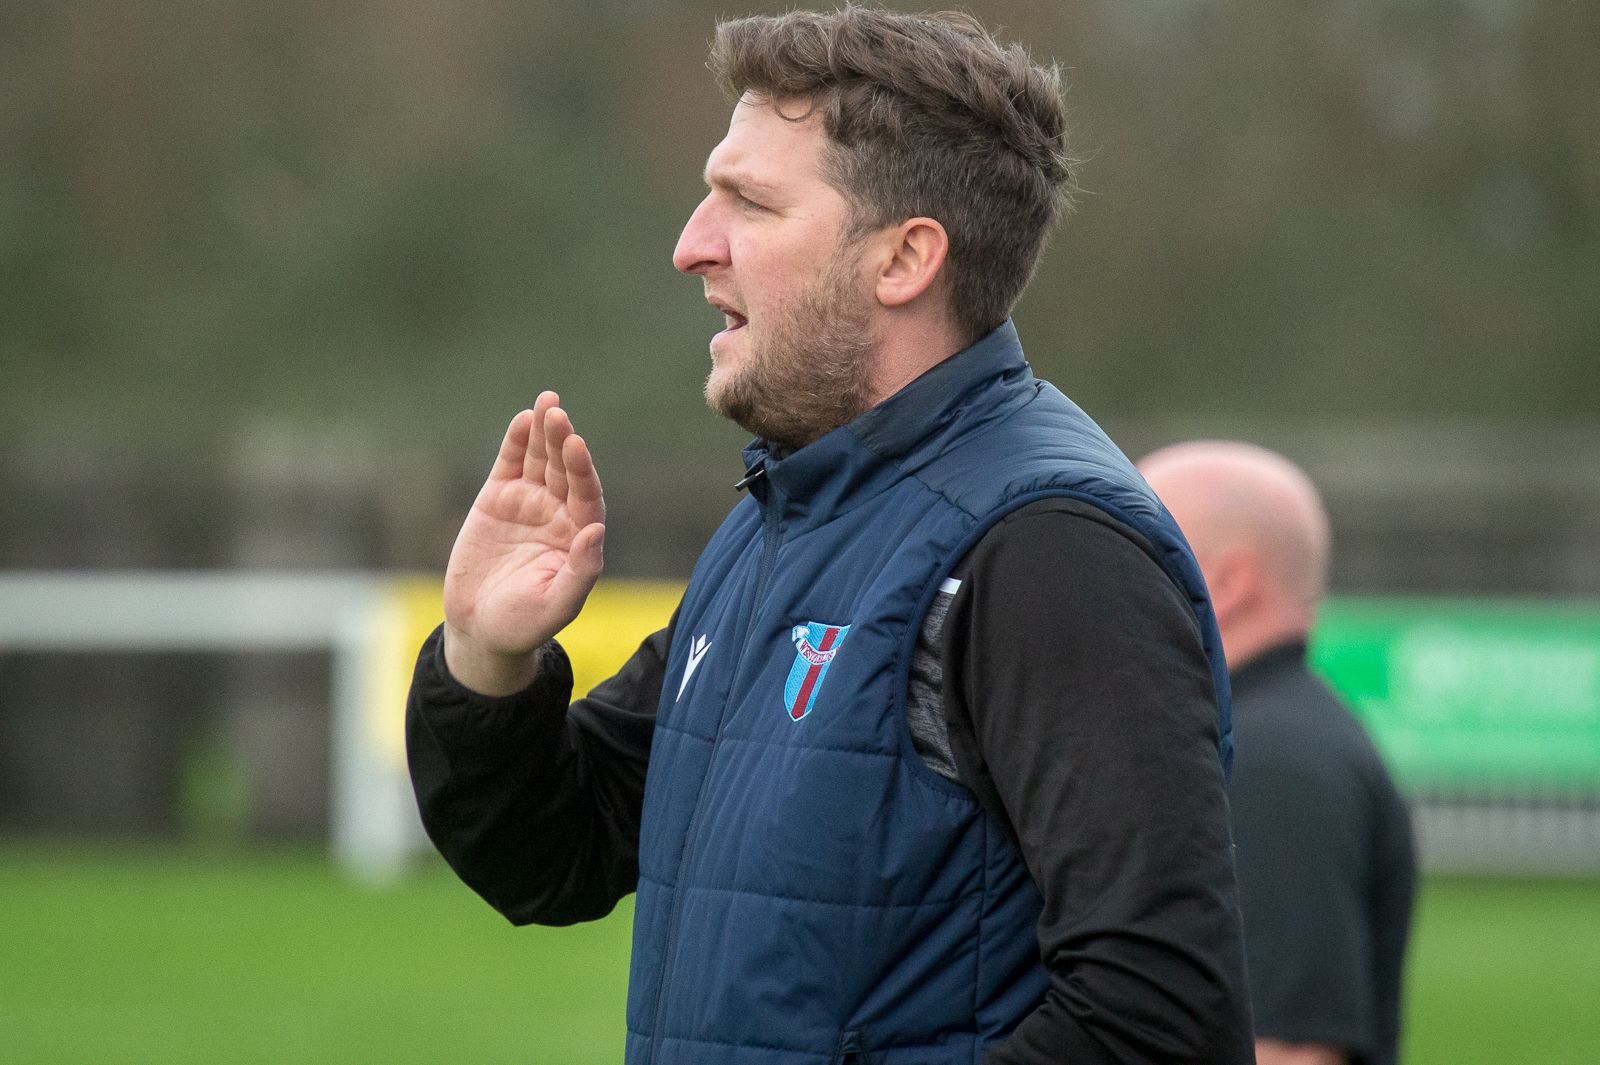 FOOTBALL | Three new signings for Phil Glover’s ambitious Westfields side as promotion chase hots up